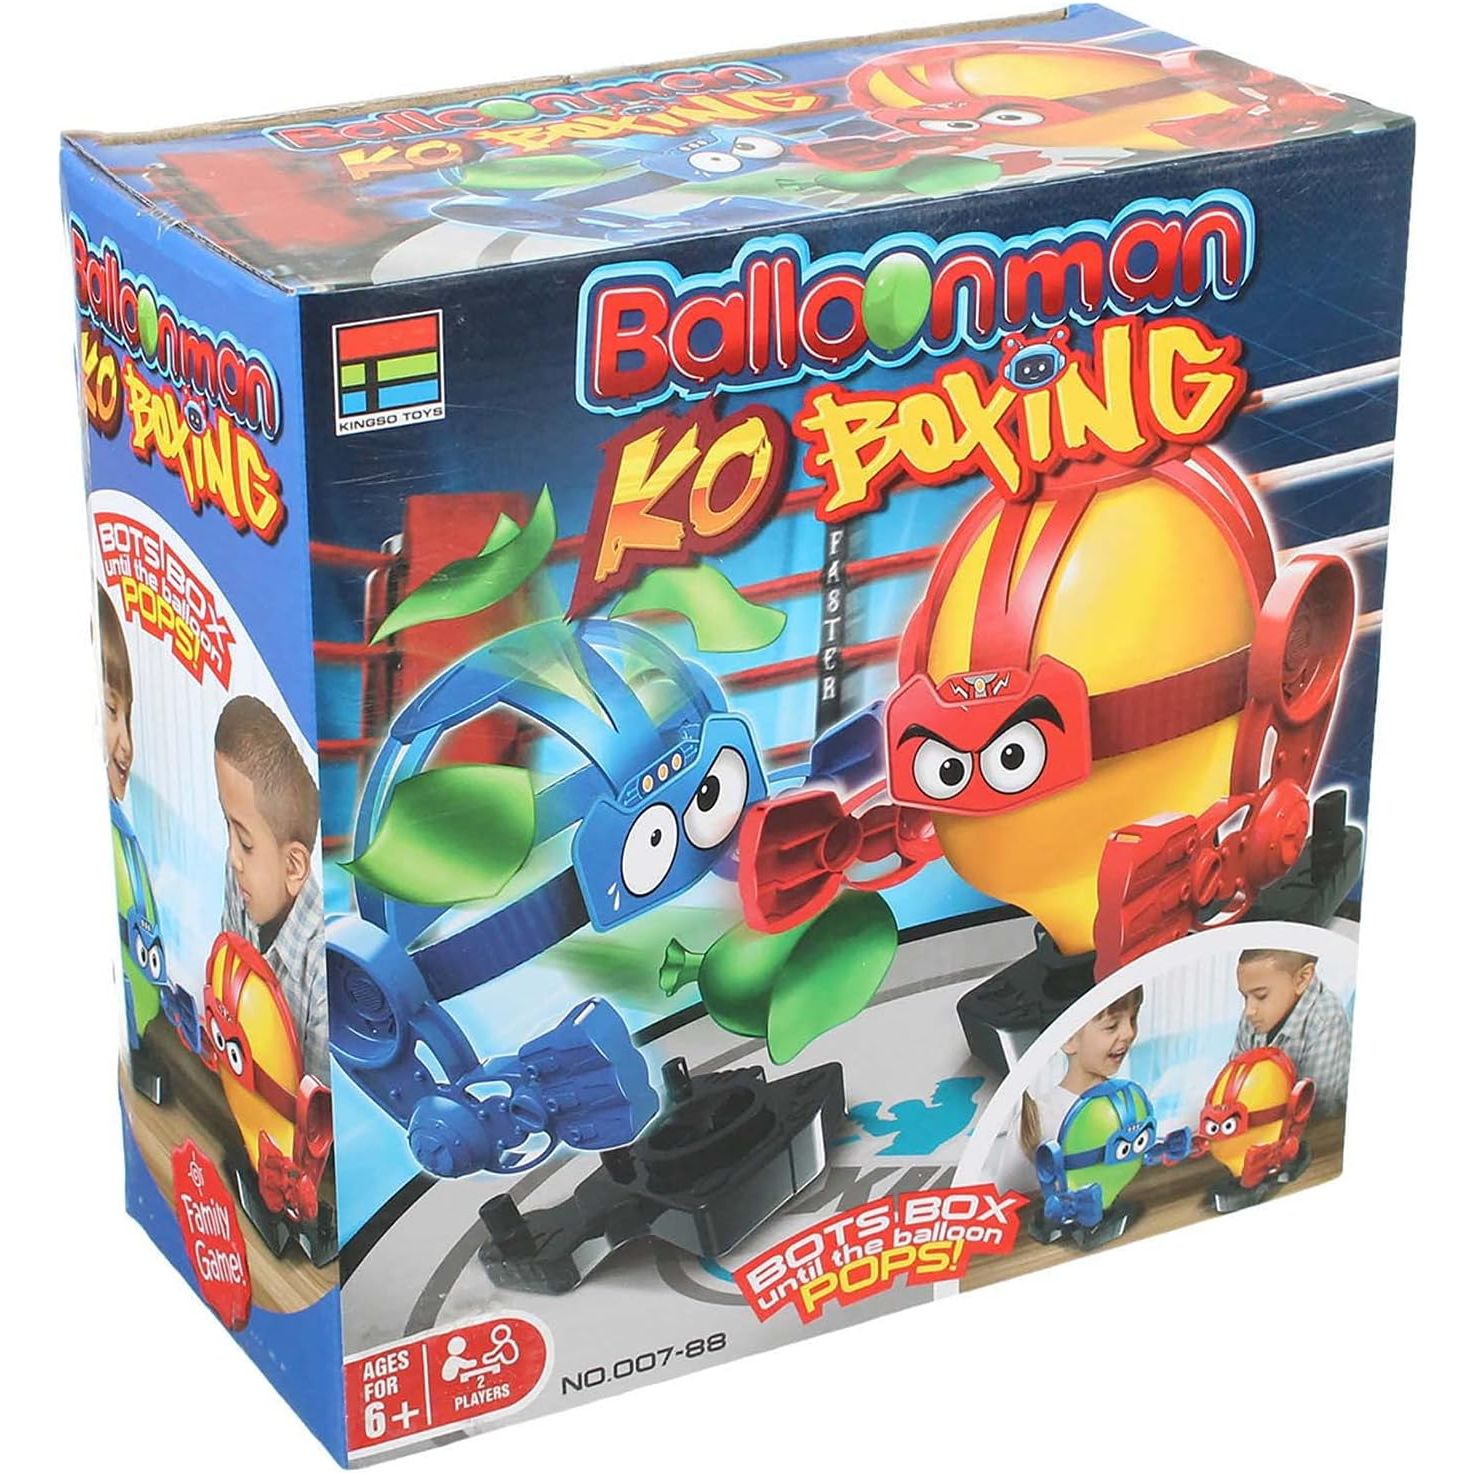 Balloon Man ko Boxing - Battle it out with your opponent to pop their balloonbot before yours to win the game!